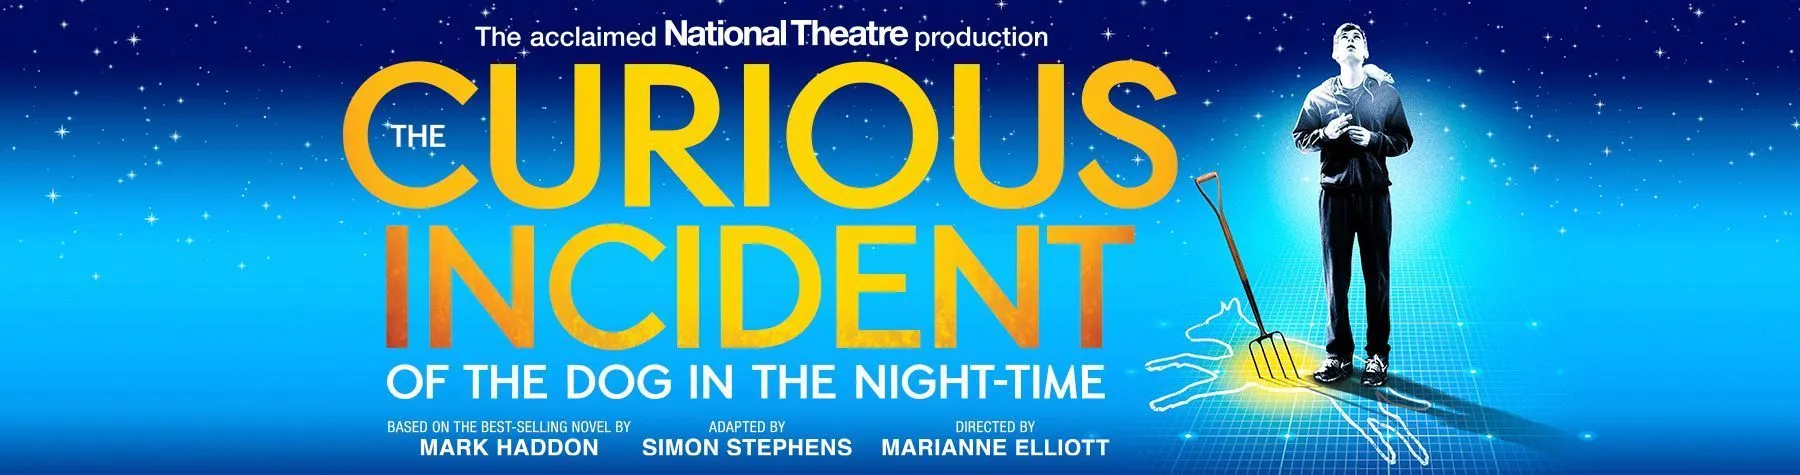 Wembley Park Theatre welcomes this award-winning production. Buy The Curious Incident of the Dog in the Night-Time tickets now. 